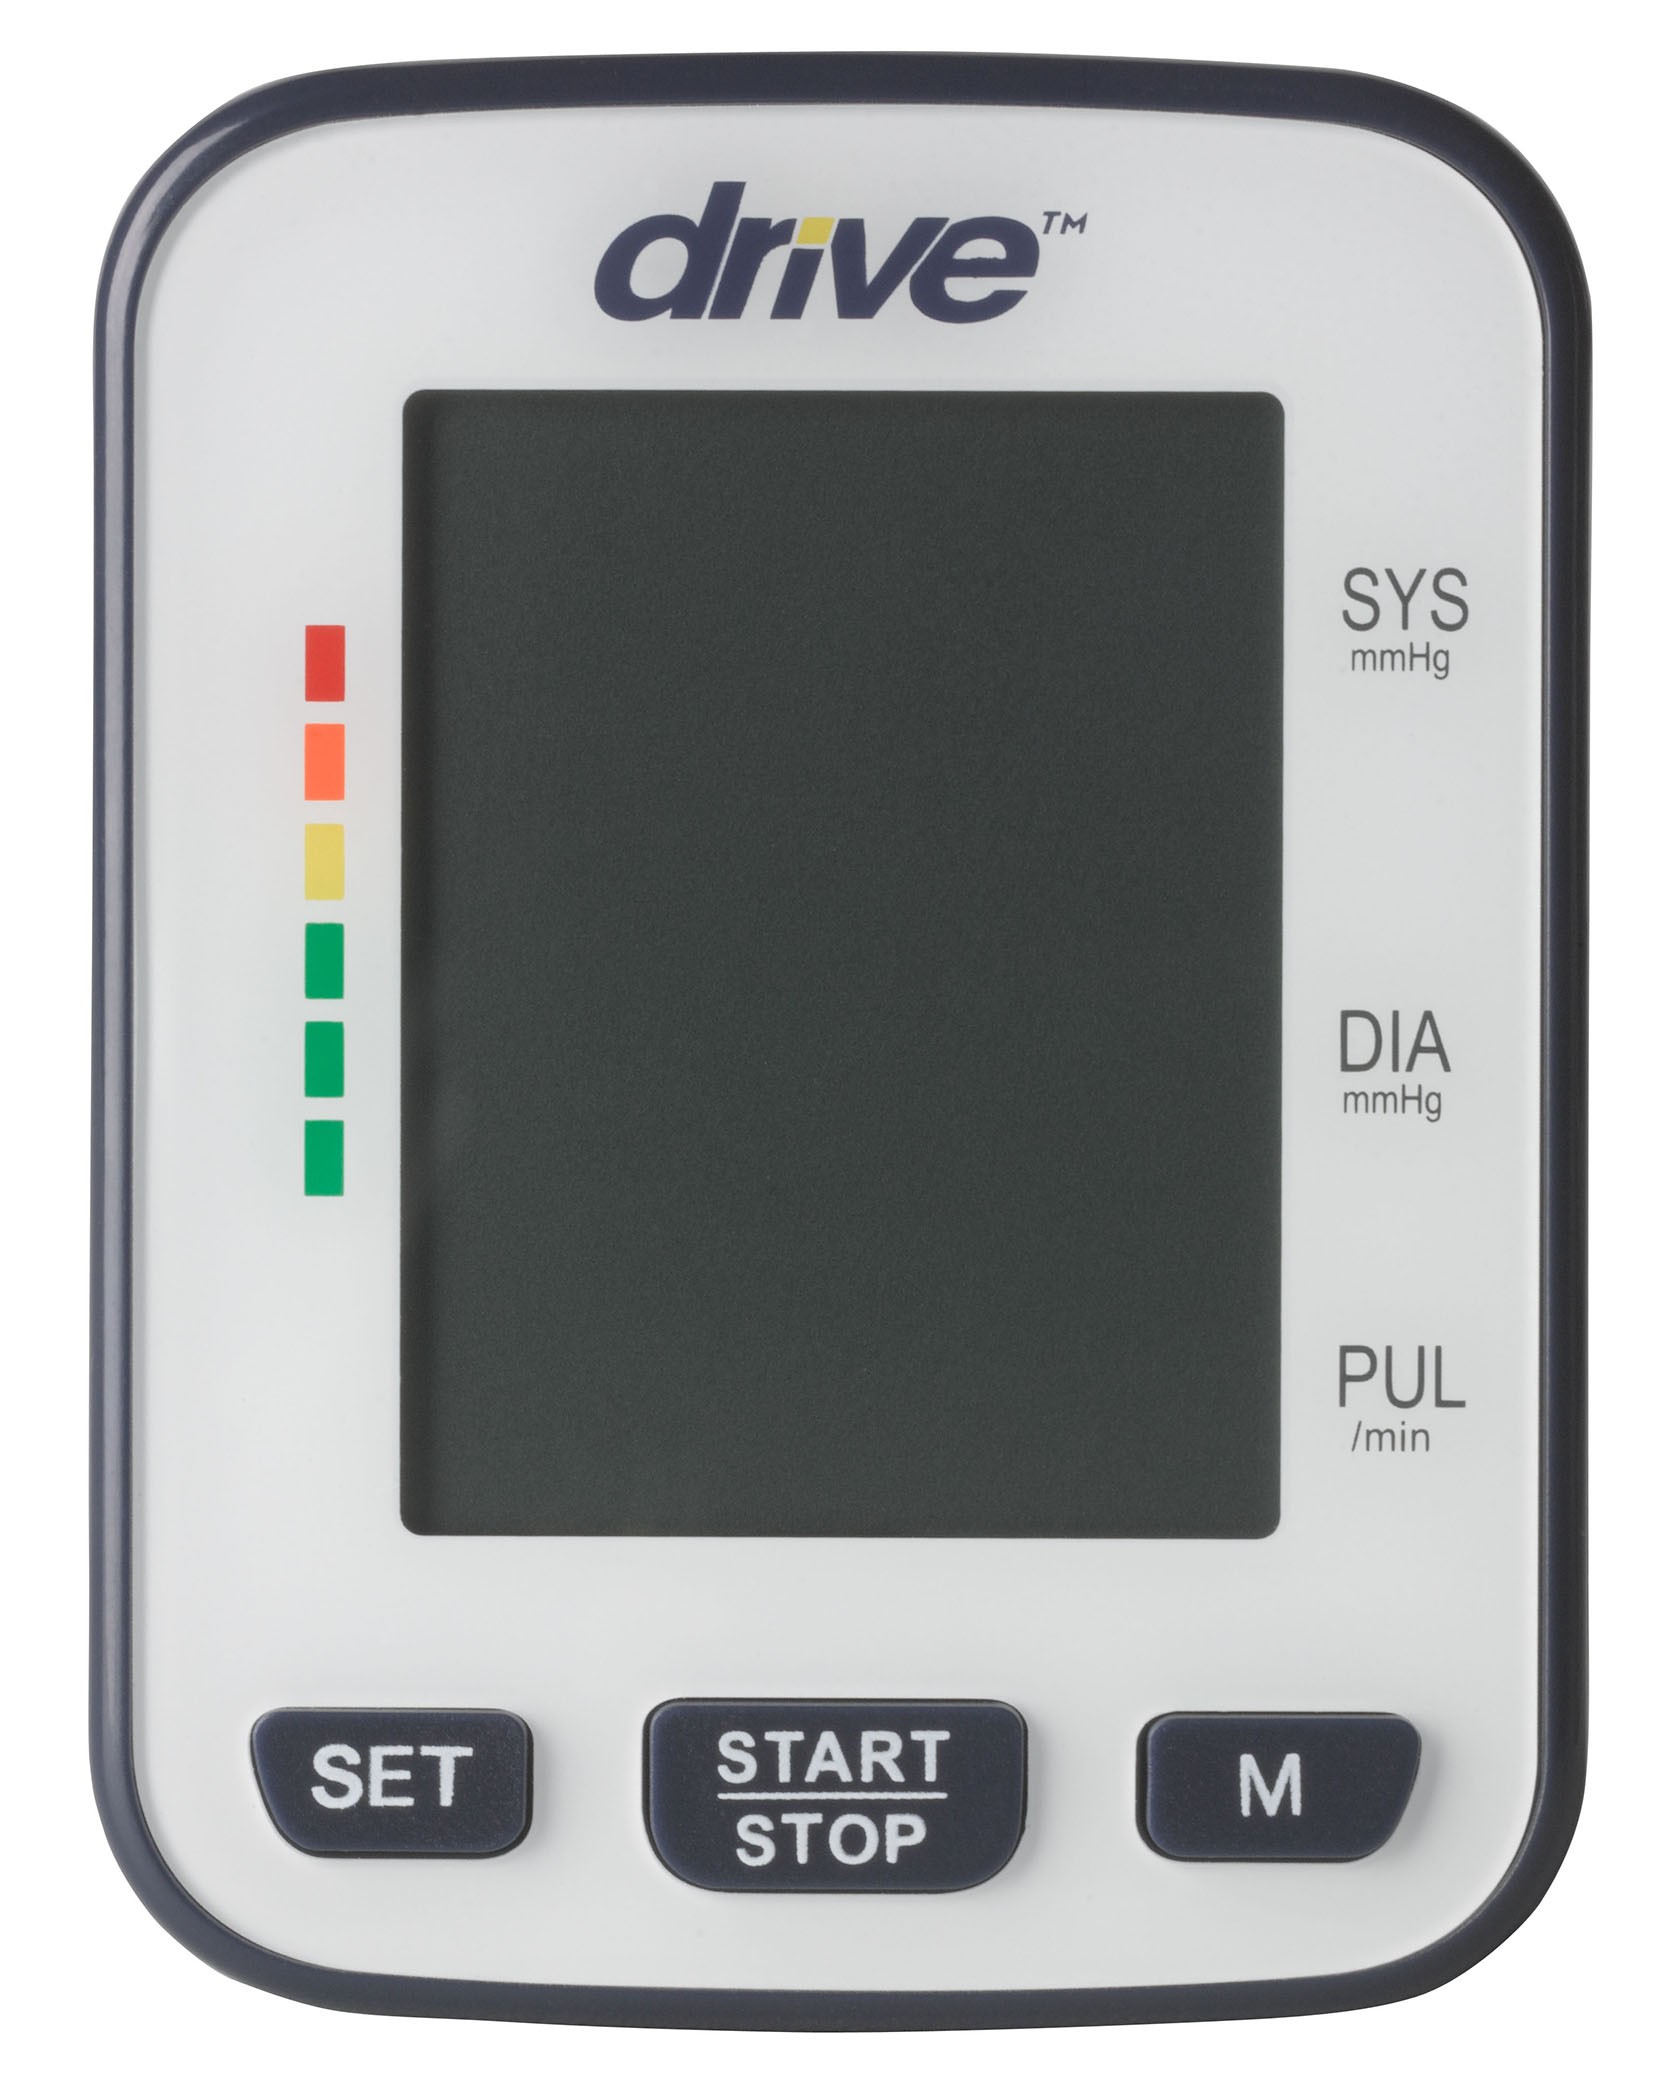 Blood Pressure Monitors Products, Supplies and Equipment